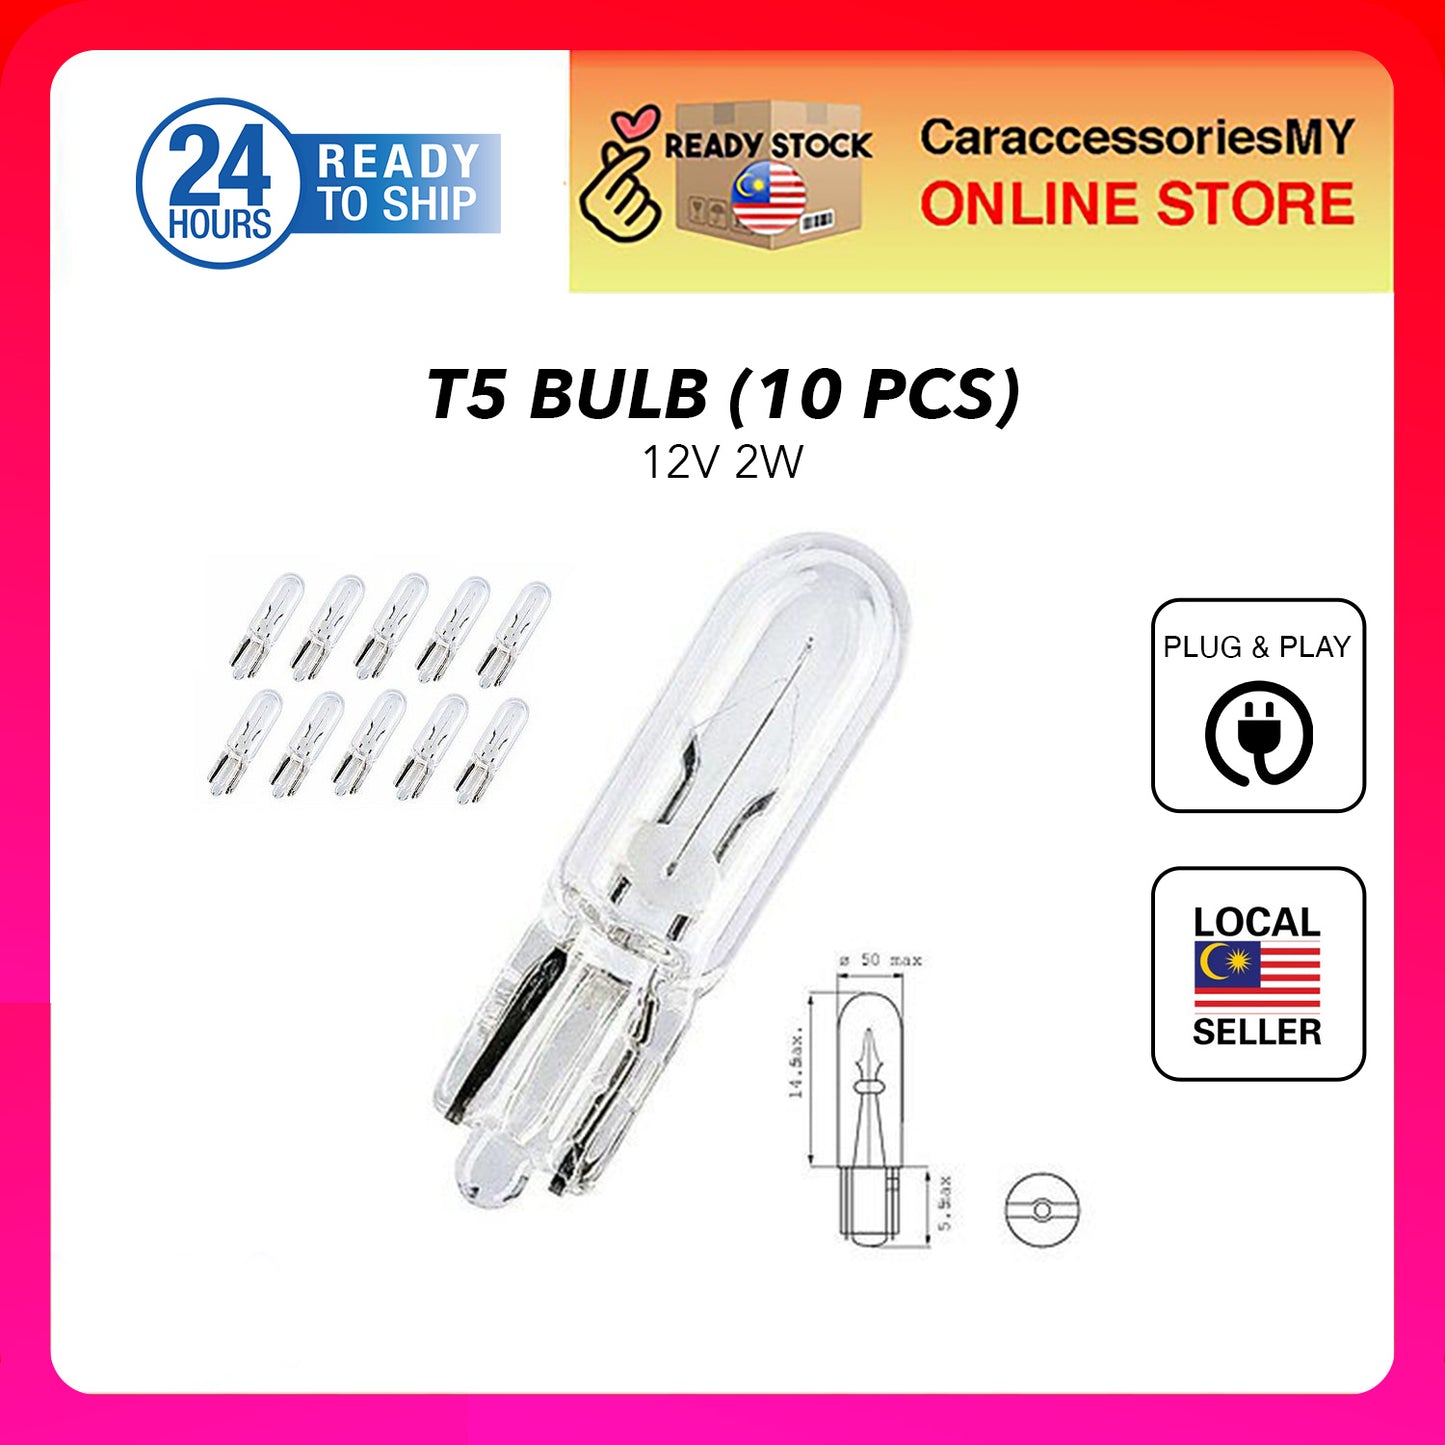 10 pcs T5 Bulb Meter Cluster Dashboard Motorcycle A/C Aircond Conditioner Dashboard Car Meter Light Bulb proton perodua